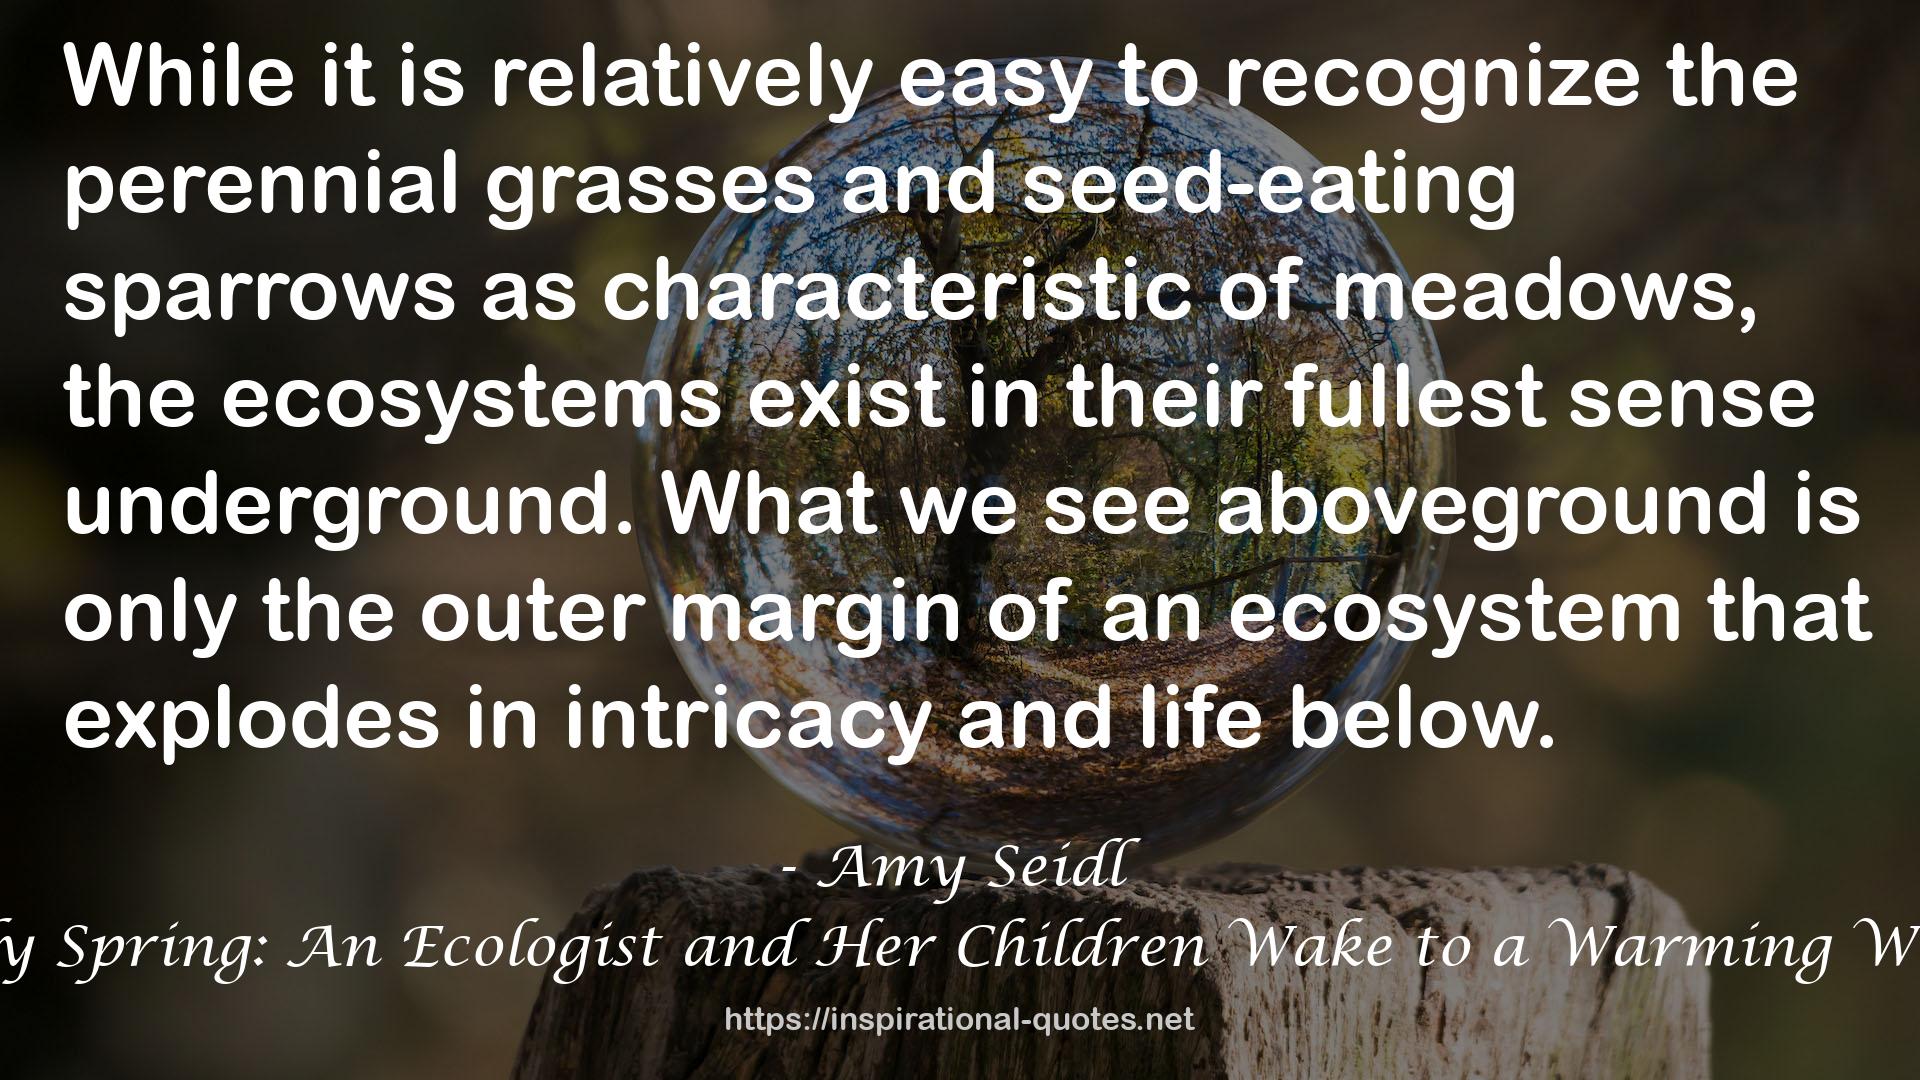 Amy Seidl QUOTES